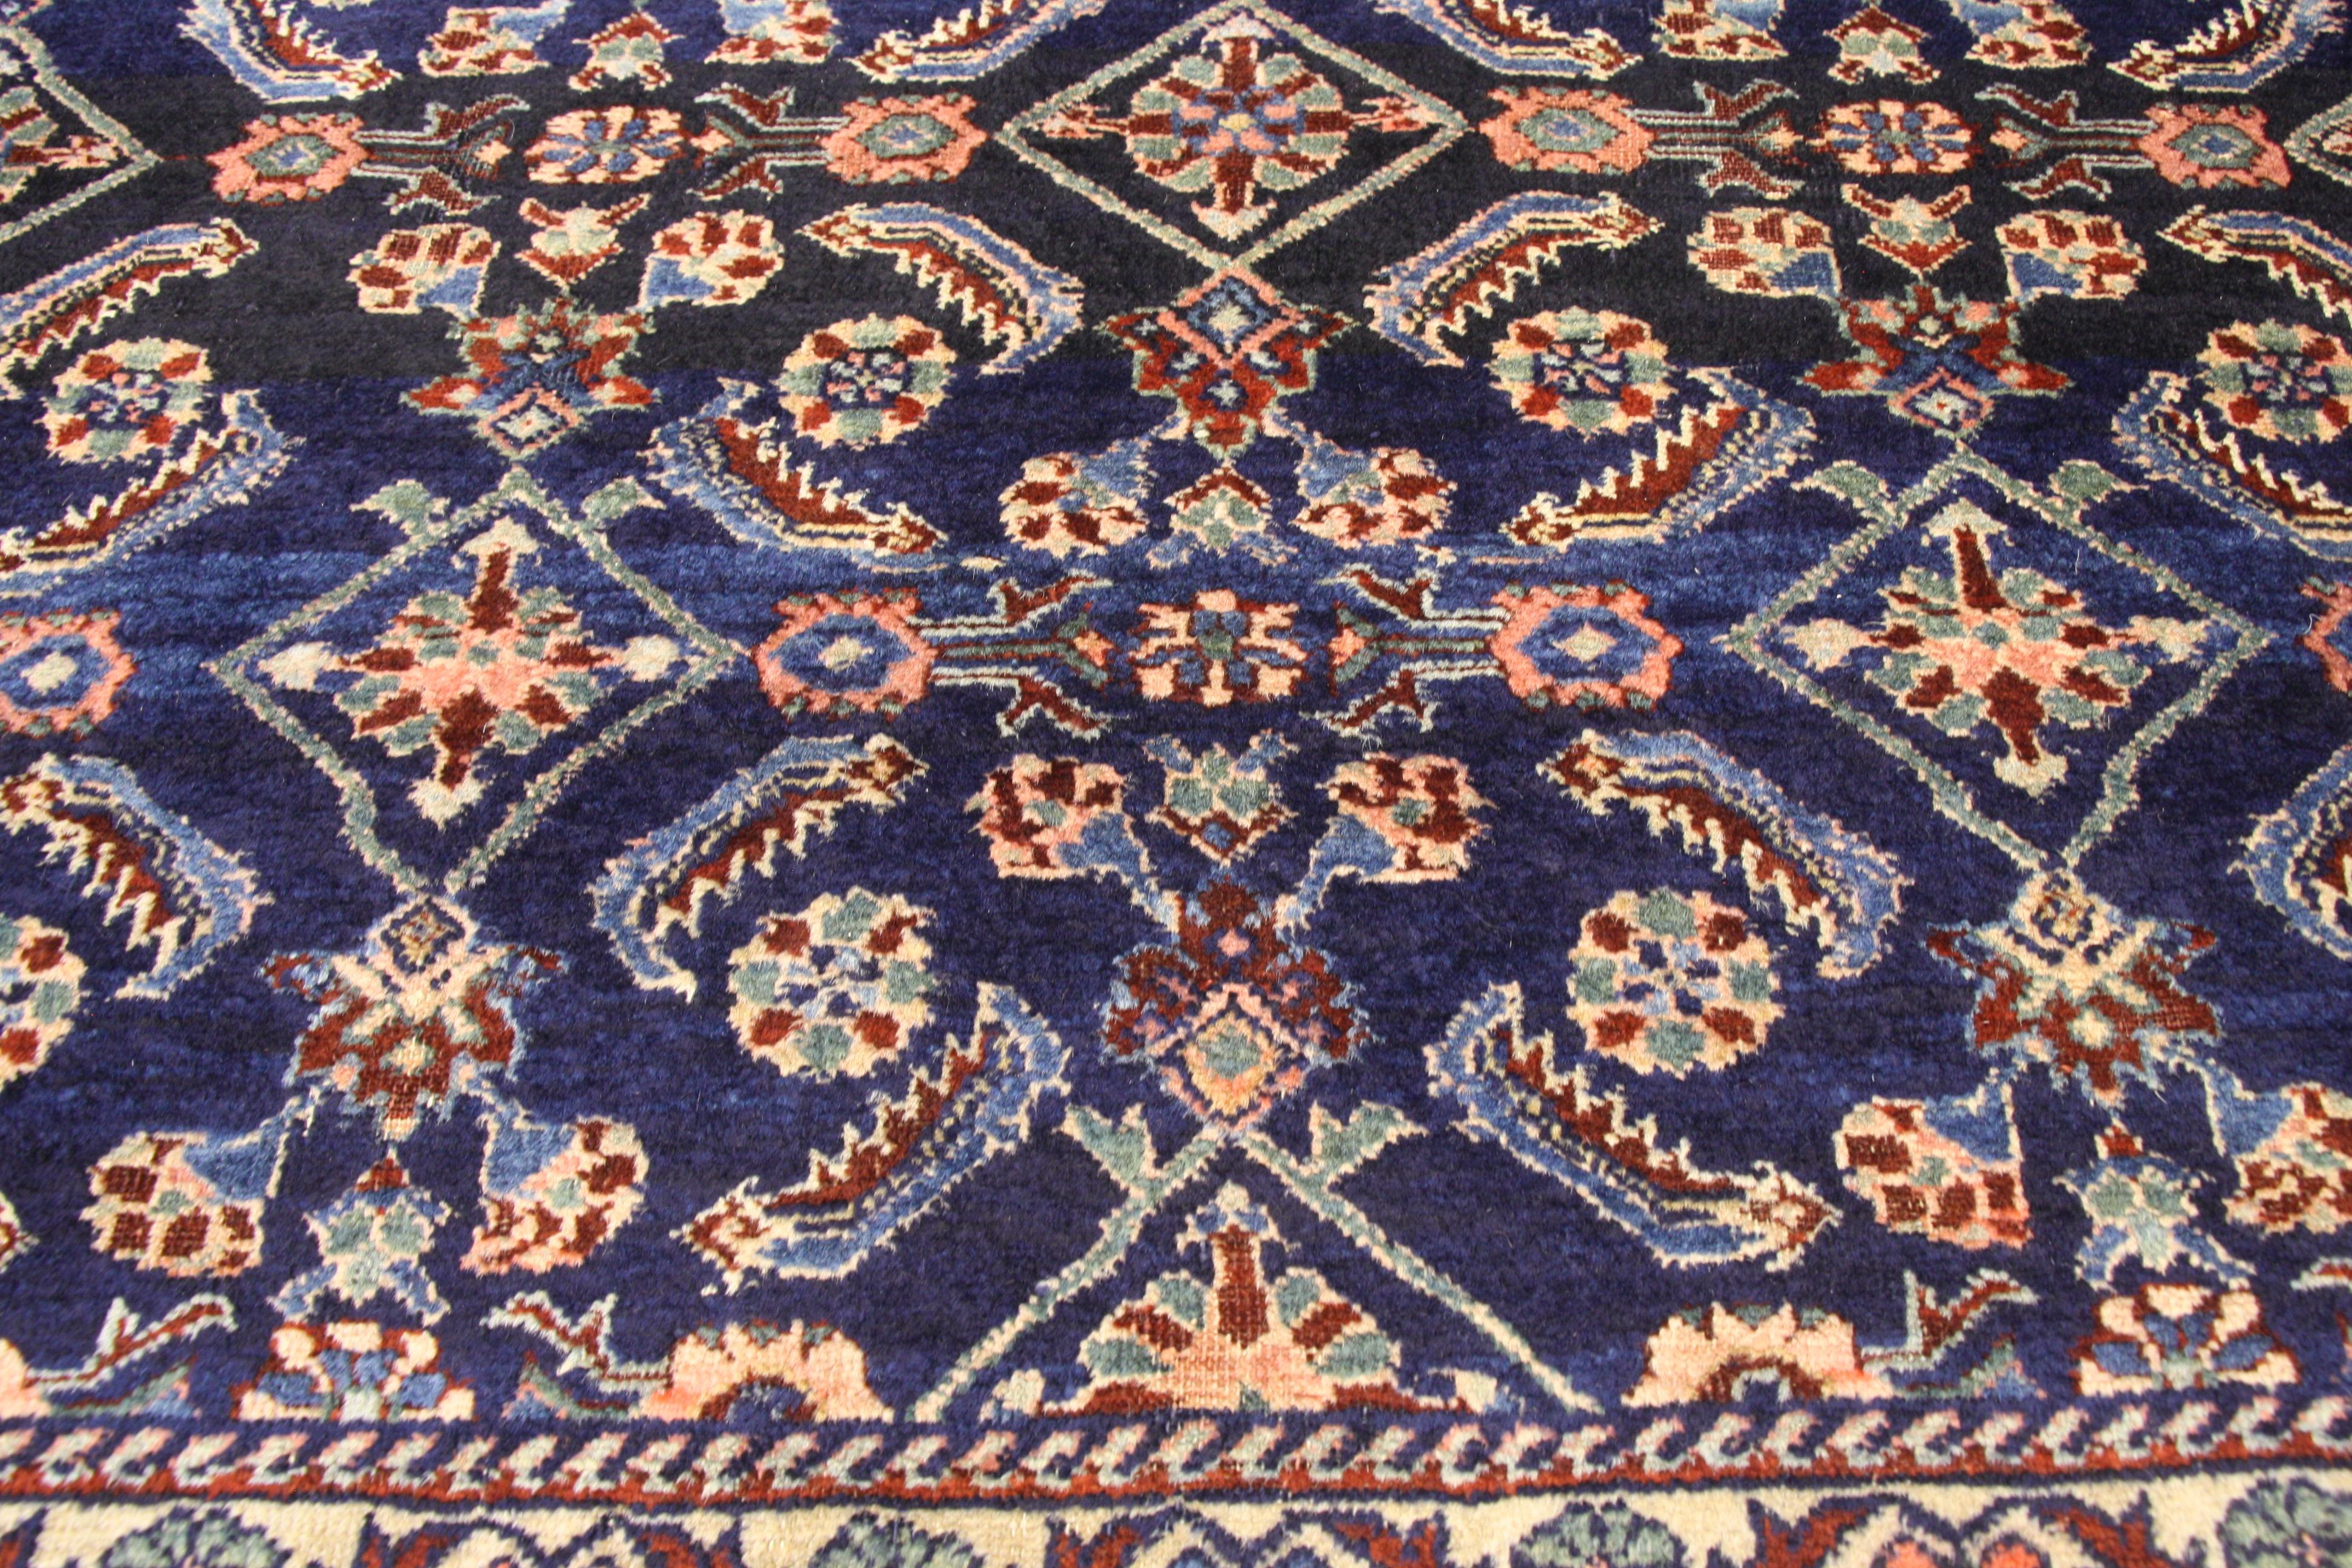 Hand-Crafted Antique Persian Lilihan Rug with Traditional Modern Style